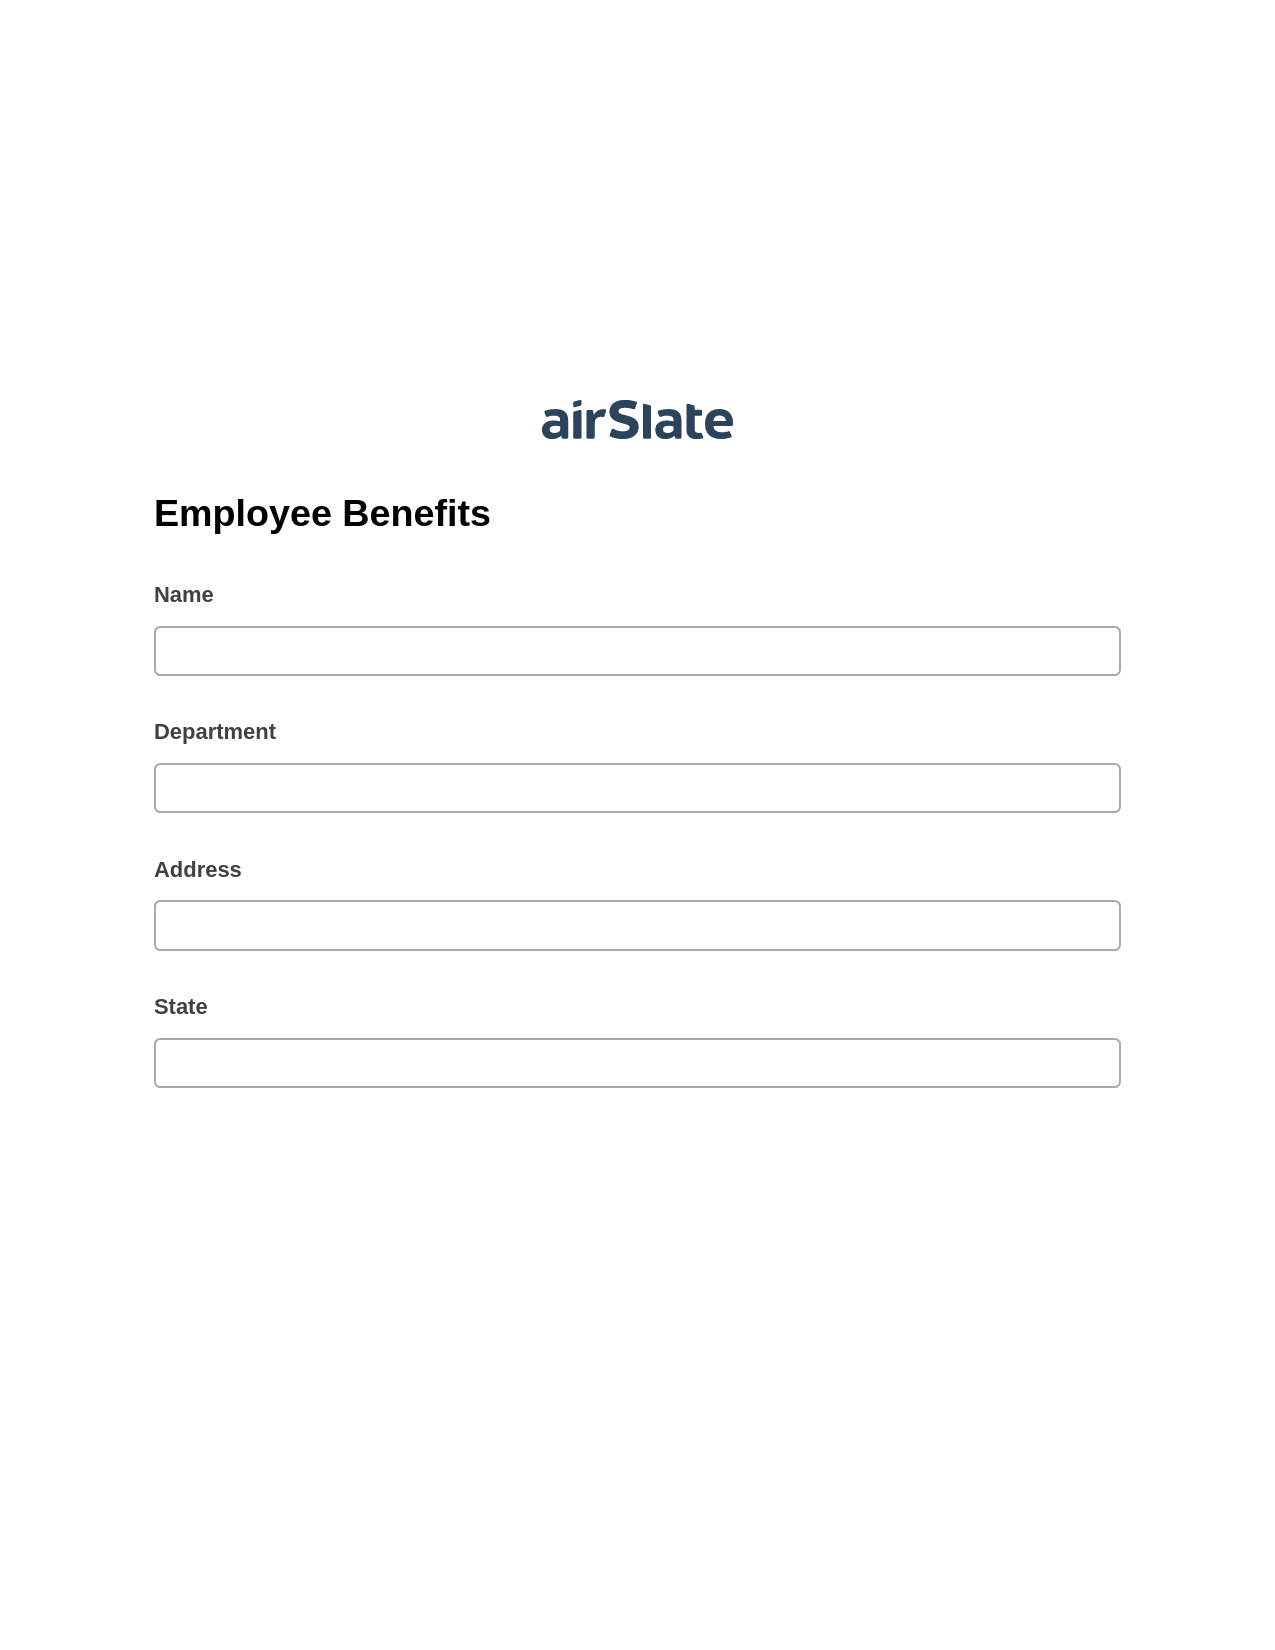 Employee Benefits Pre-fill from Salesforce Record Bot, Update Salesforce Record Bot, Export to Formstack Documents Bot